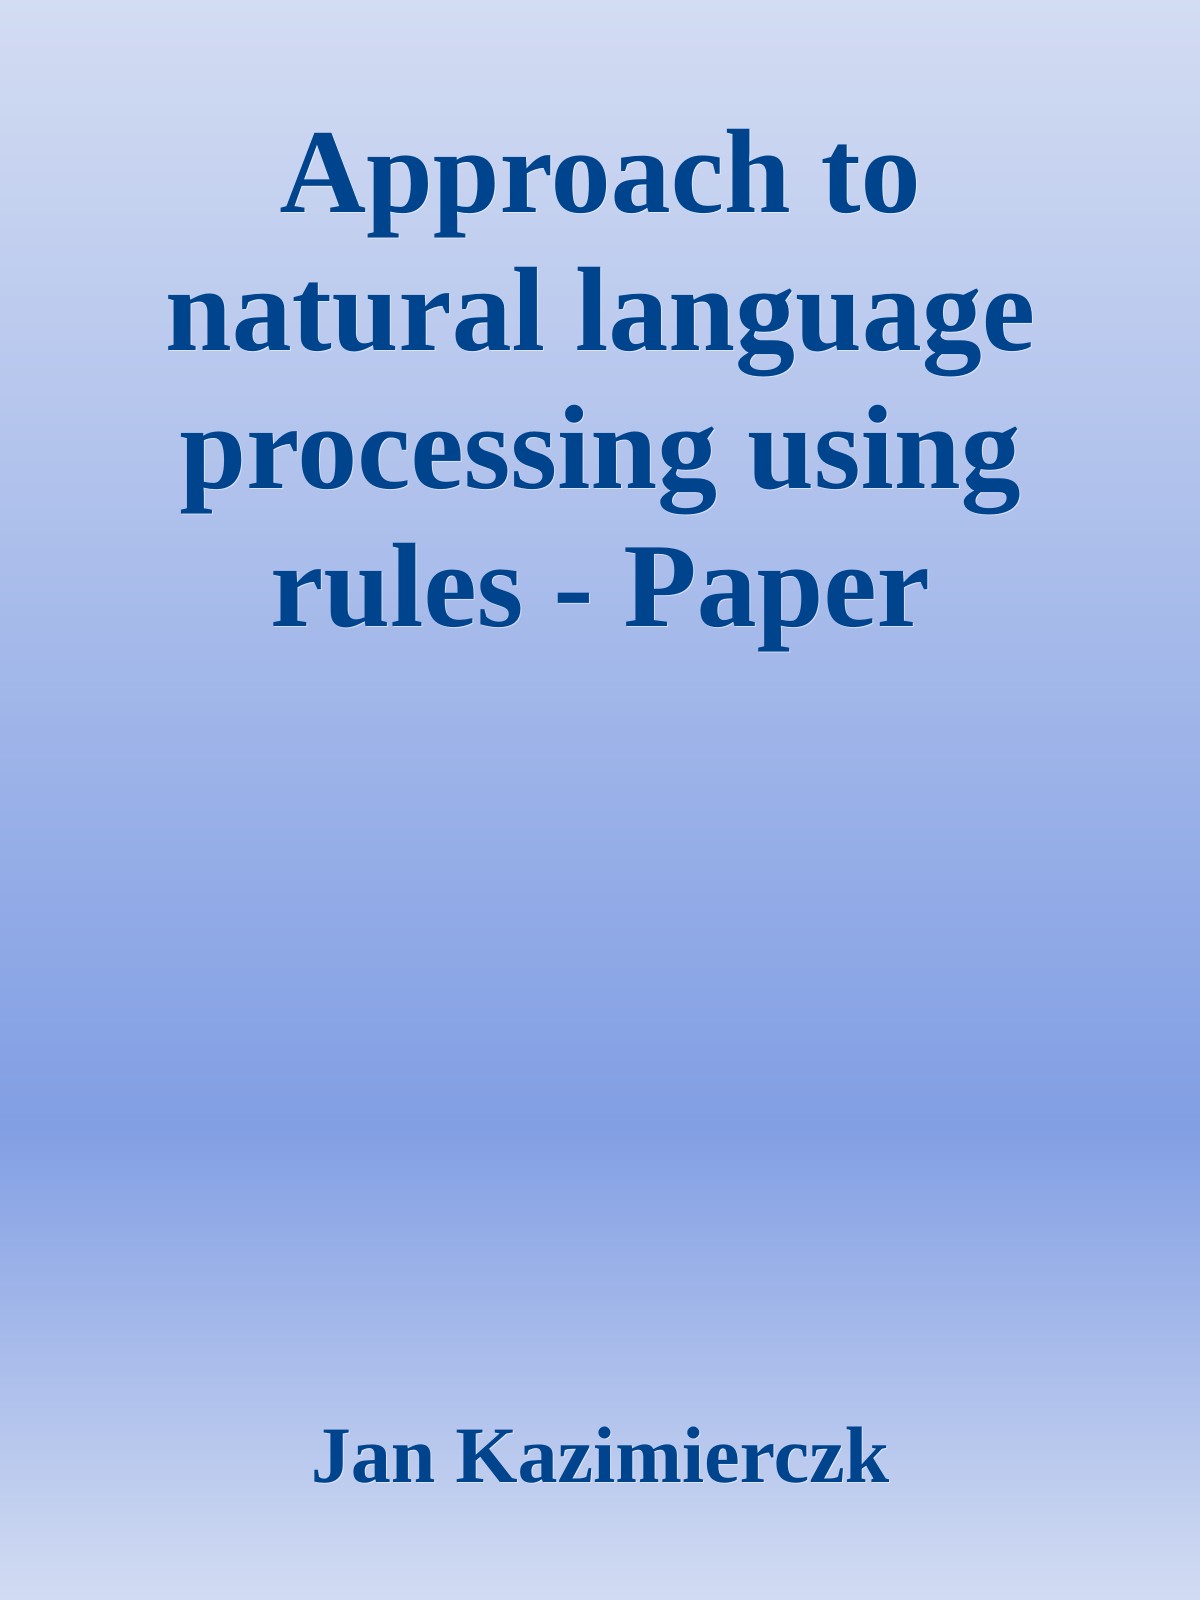 Approach to natural language processing using rules - Paper